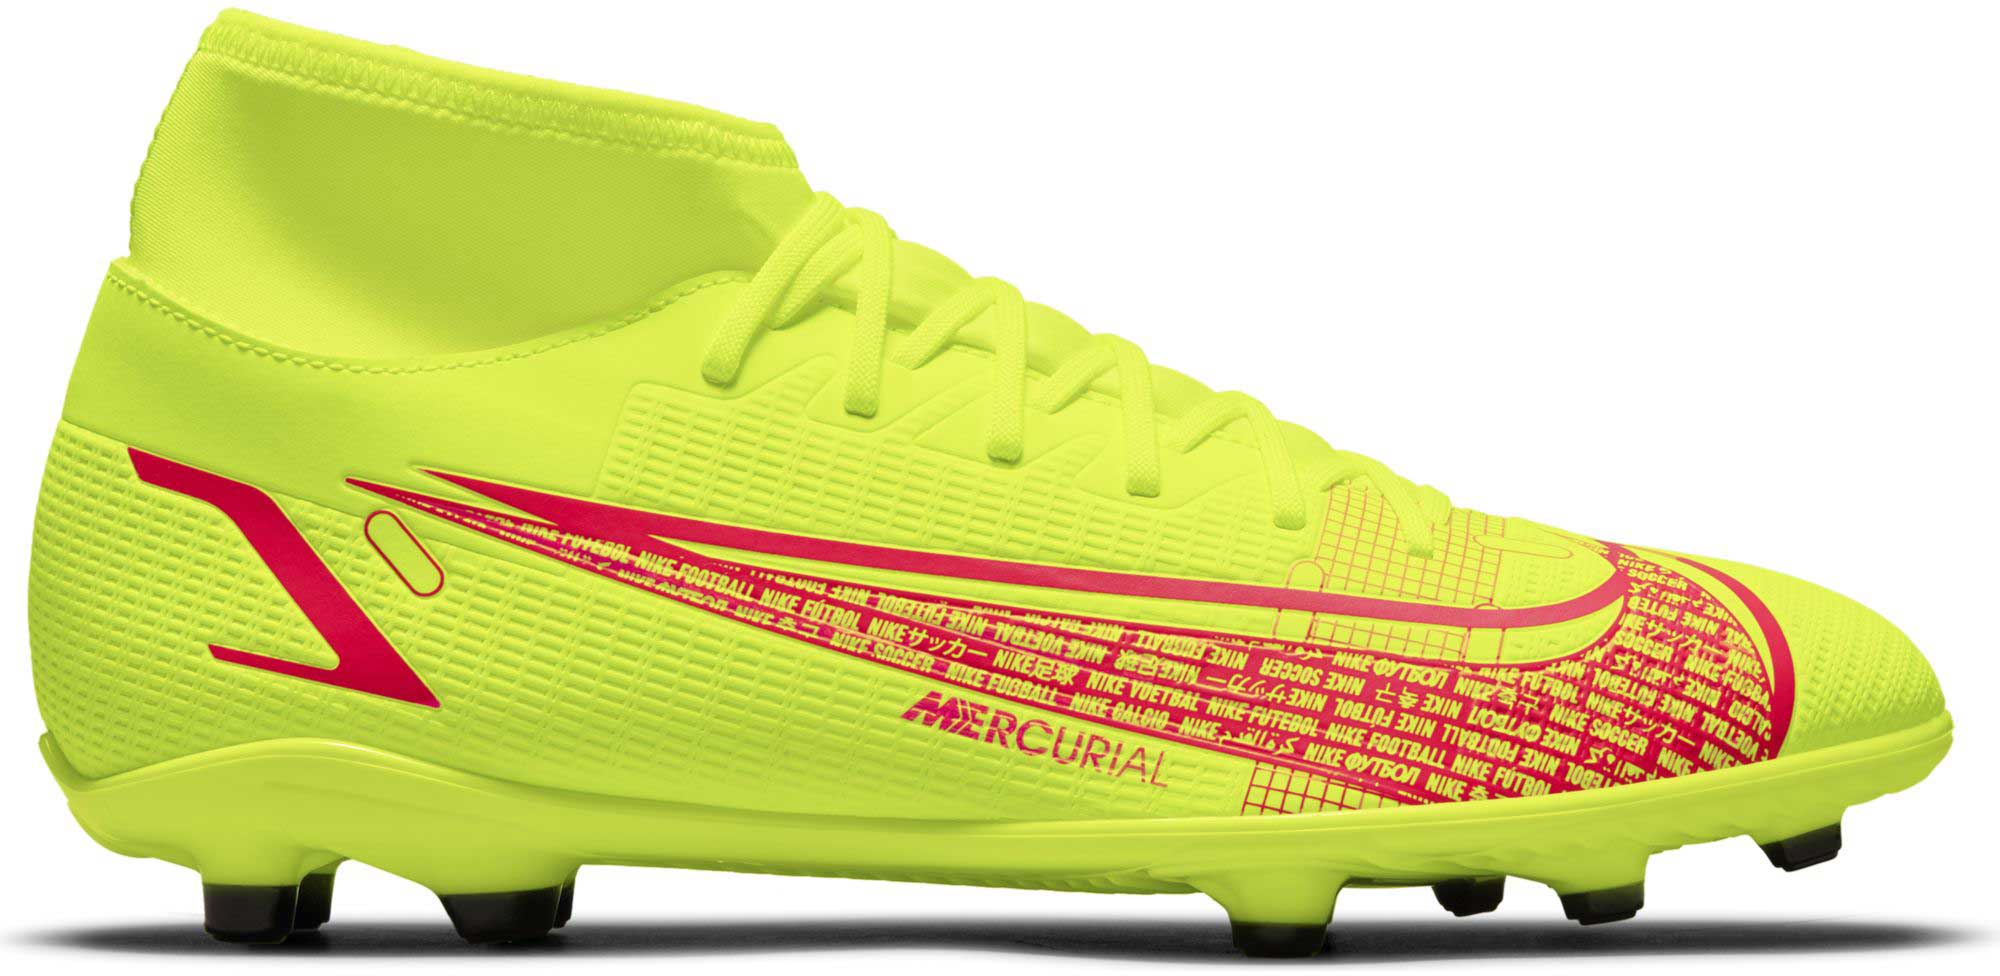 mercurial superfly 7 club mds fg soccer cleats